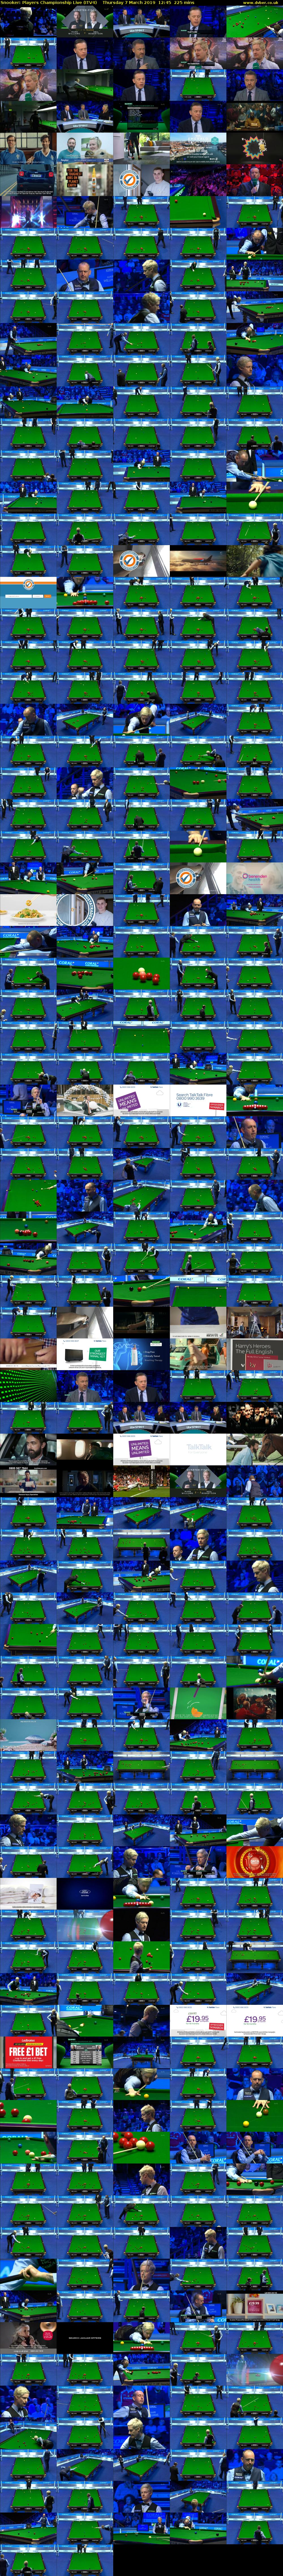 Snooker: Players Championship Live (ITV4) Thursday 7 March 2019 12:45 - 16:30